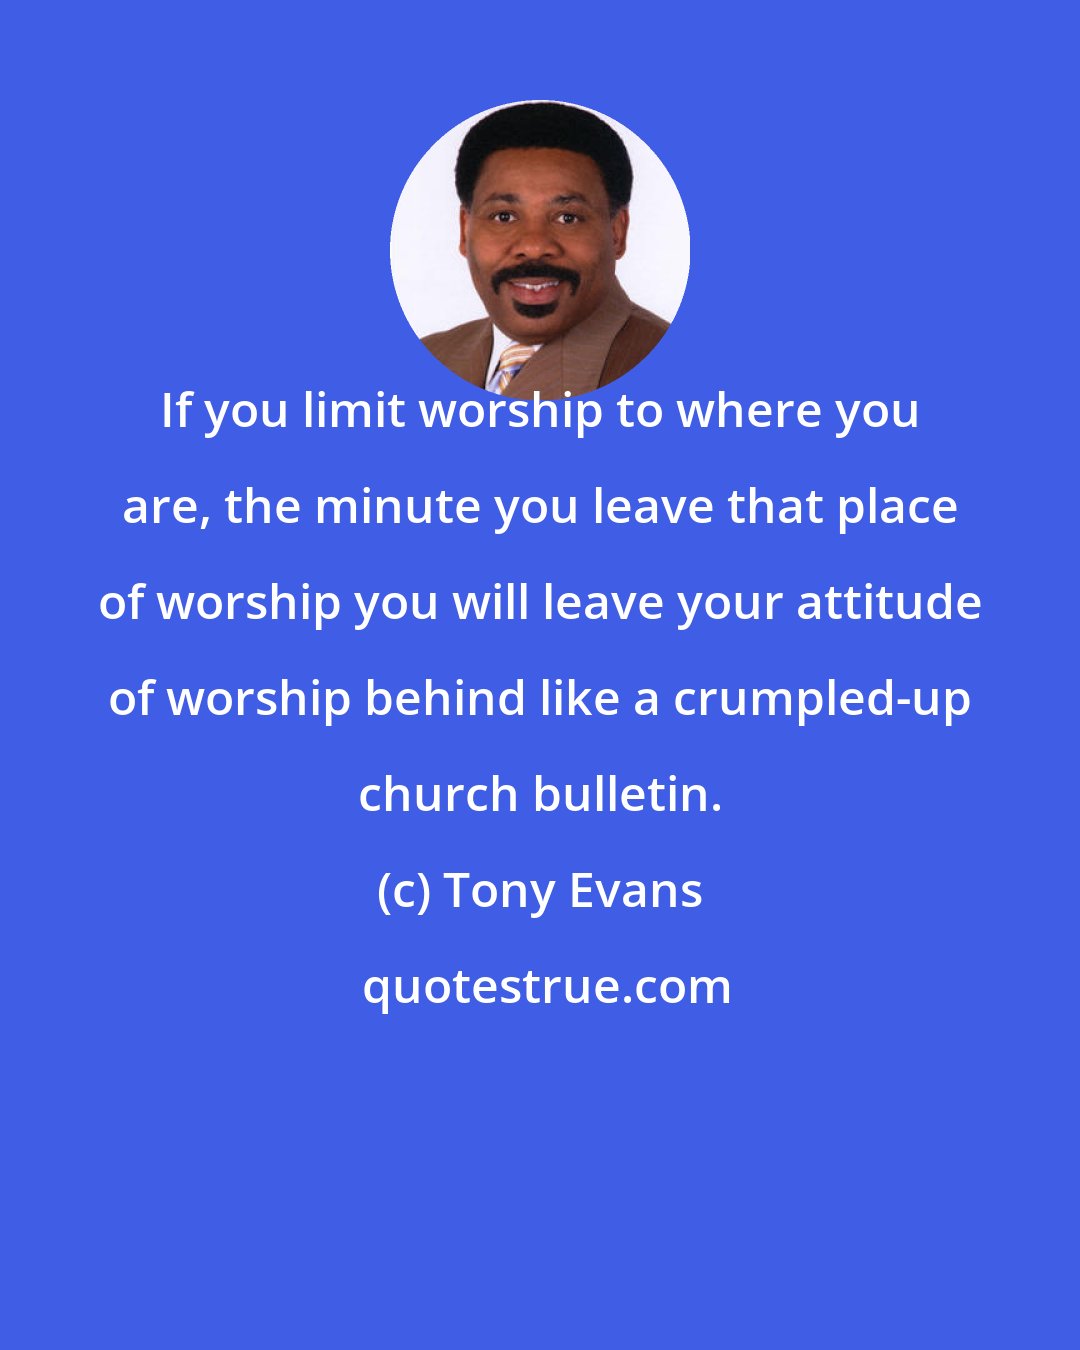 Tony Evans: If you limit worship to where you are, the minute you leave that place of worship you will leave your attitude of worship behind like a crumpled-up church bulletin.